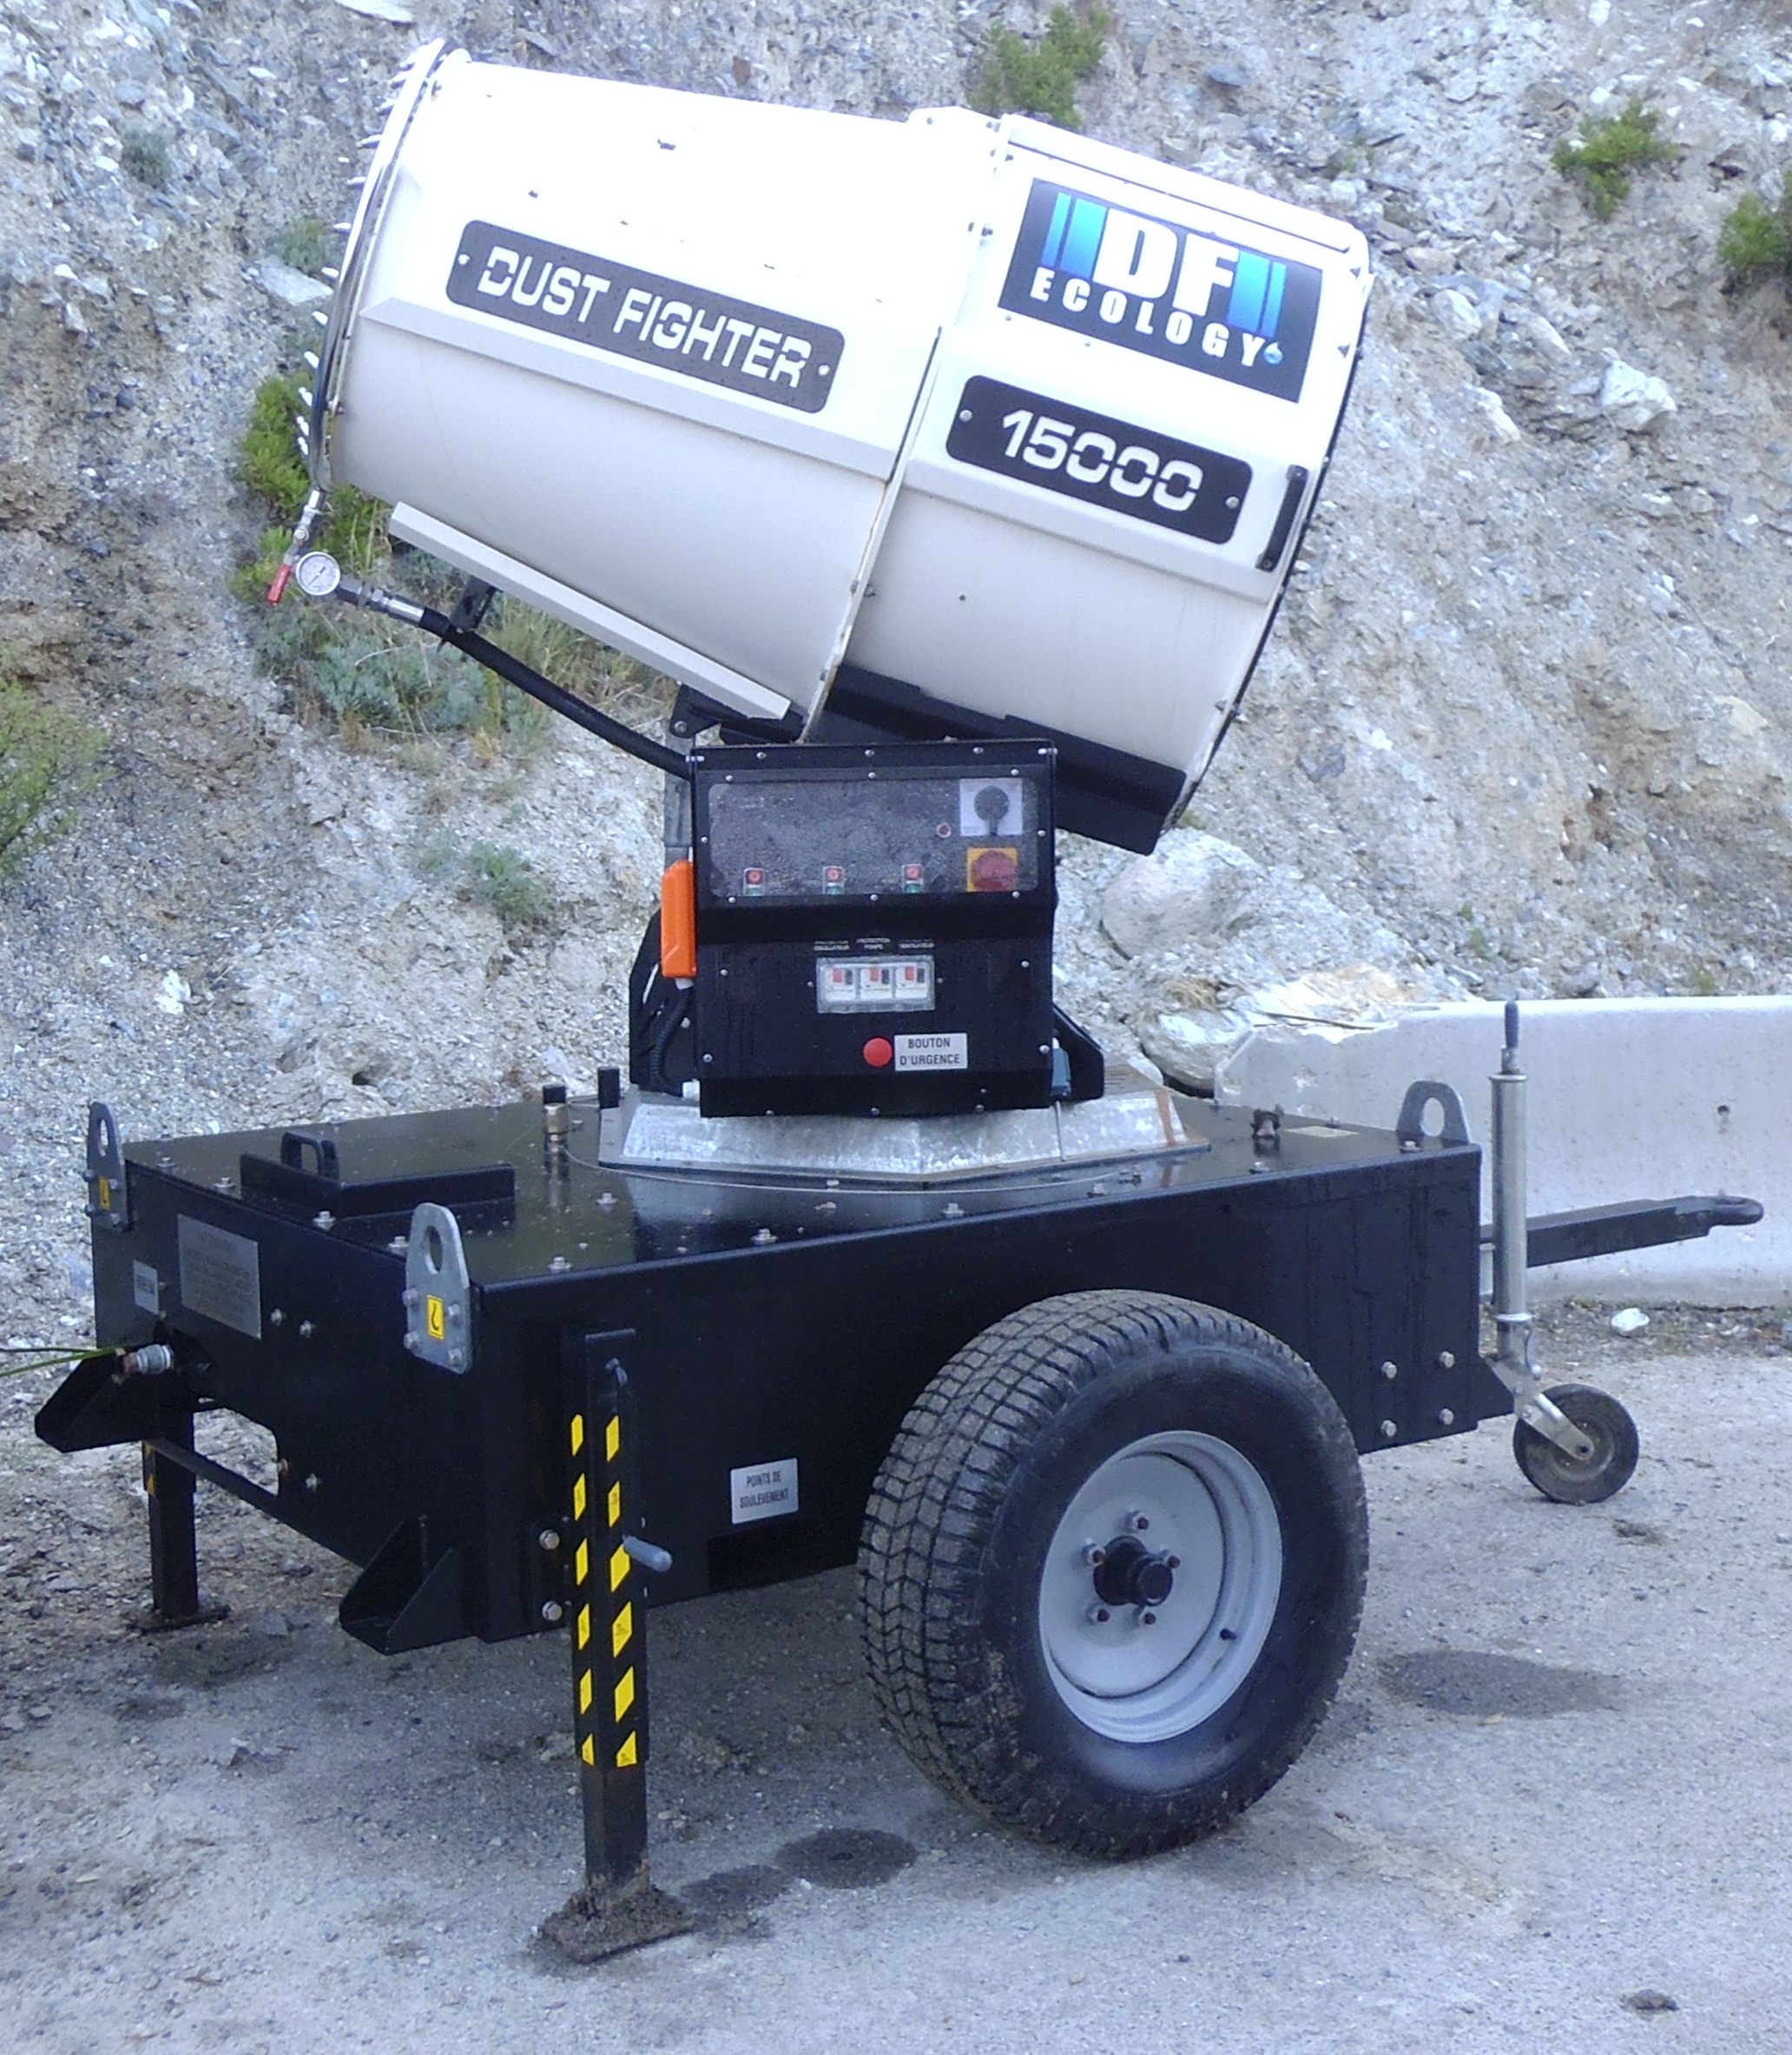 The DF15000-SeaWater in use in Corsica